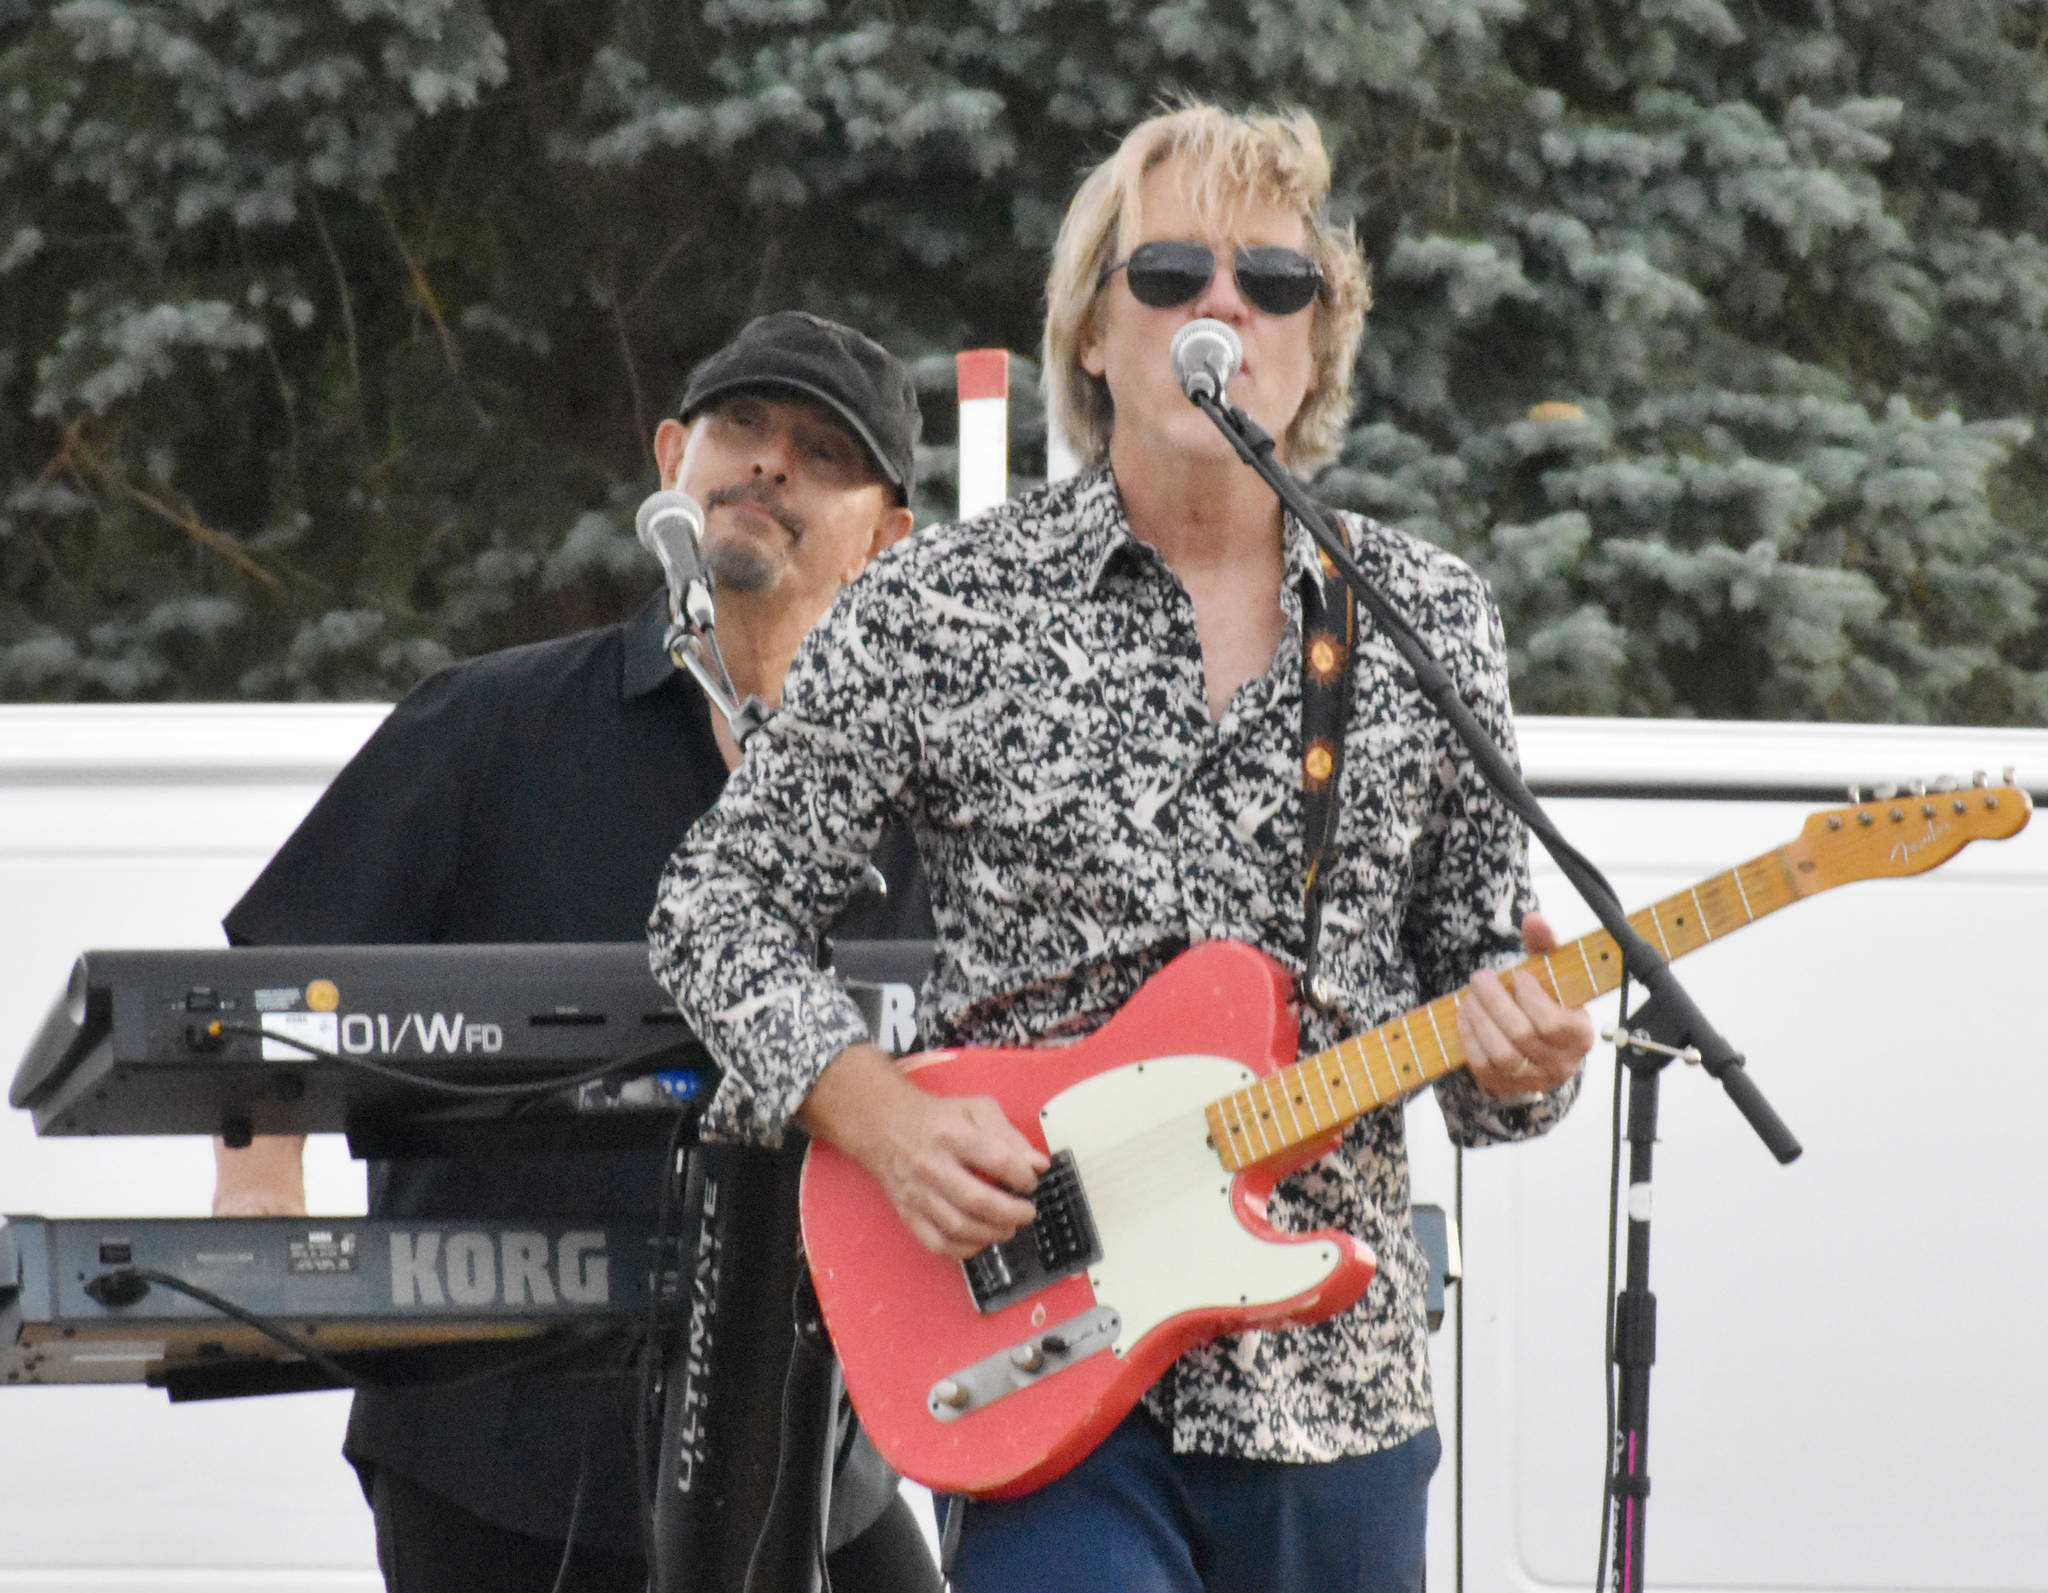 PHOTO BY KEVIN HANSON While Enumclaw’s summer concerts have several weeks remaining, Buckley wrapped up its series Aug, 5 with a performance by Wings ‘n’ Things, a Paul McCartney tribute band (above).